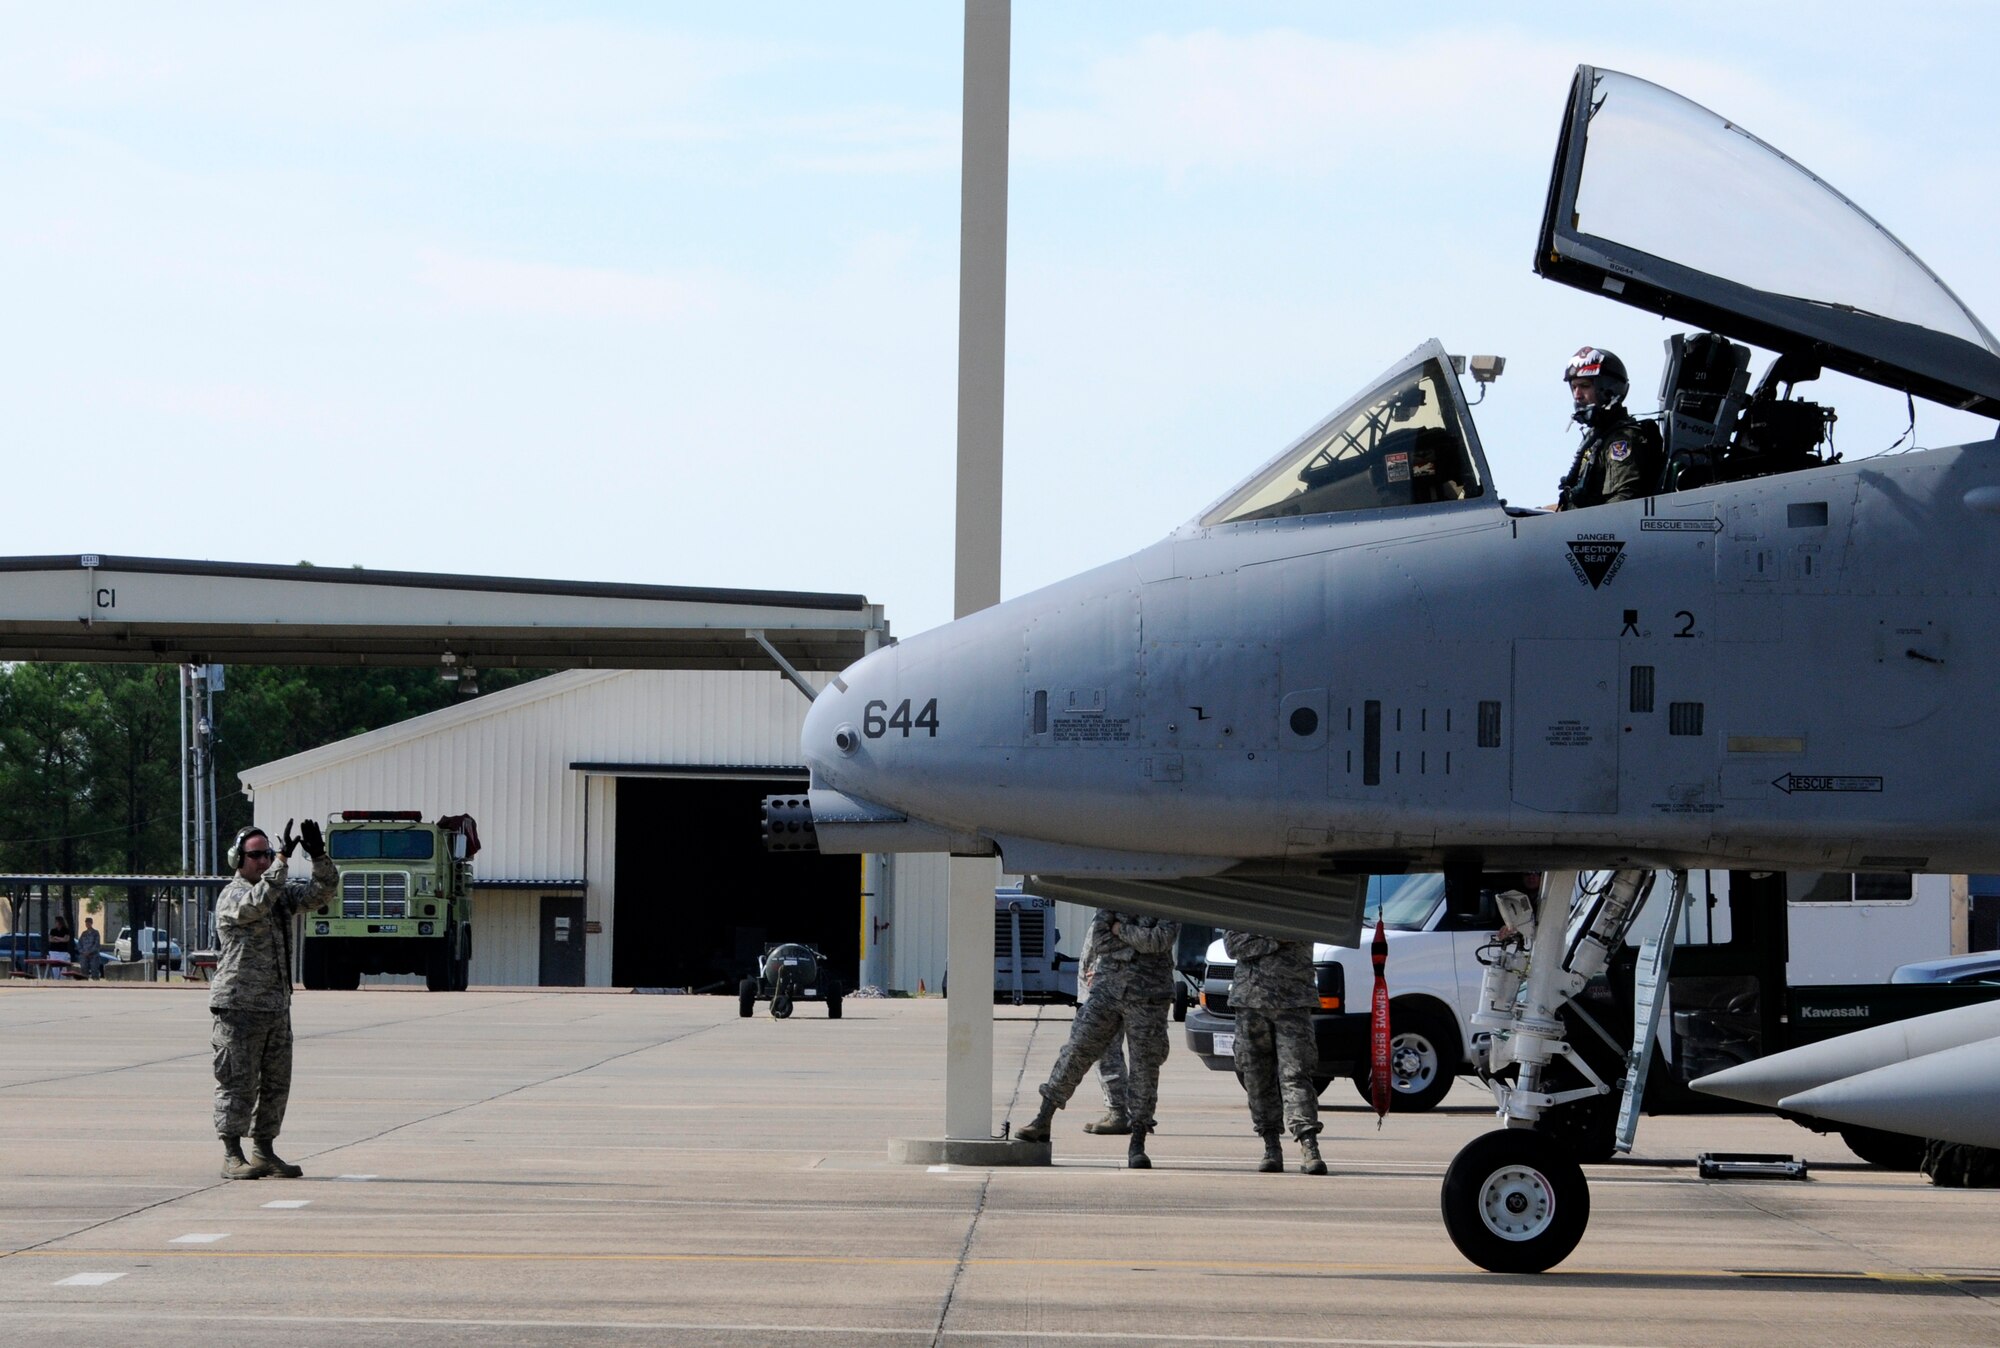 Master Sgt. Haden Key, a crew chief with the 188th Aircraft Maintenance Squadron, prepares to marshal an A-10C Thunderbolt II “Warthog,” Sept. 10 at Ebbing Air National Guard Base in Fort Smith, Ark. The pilot, a member of Moody Air Force Base’s 75th Fighter Squadron, flew Tail No. A0644 back to Georgia, signaling the beginning of the end for the 188th’s fighter mission. The 188th will lose two Warthogs a month until the last two leave in June 2014. The 188th is in the beginning stages of converting from A-10s to an Intelligence and remotely piloted aircraft mission. The mission, which will feature the MQ-9 Reaper, will also boast the Air National Guard’s only space-focused targeting squadron. (U.S. Air National Guard photo by Senior Airman Hannah Landeros/188th Fighter Wing Public Affairs)